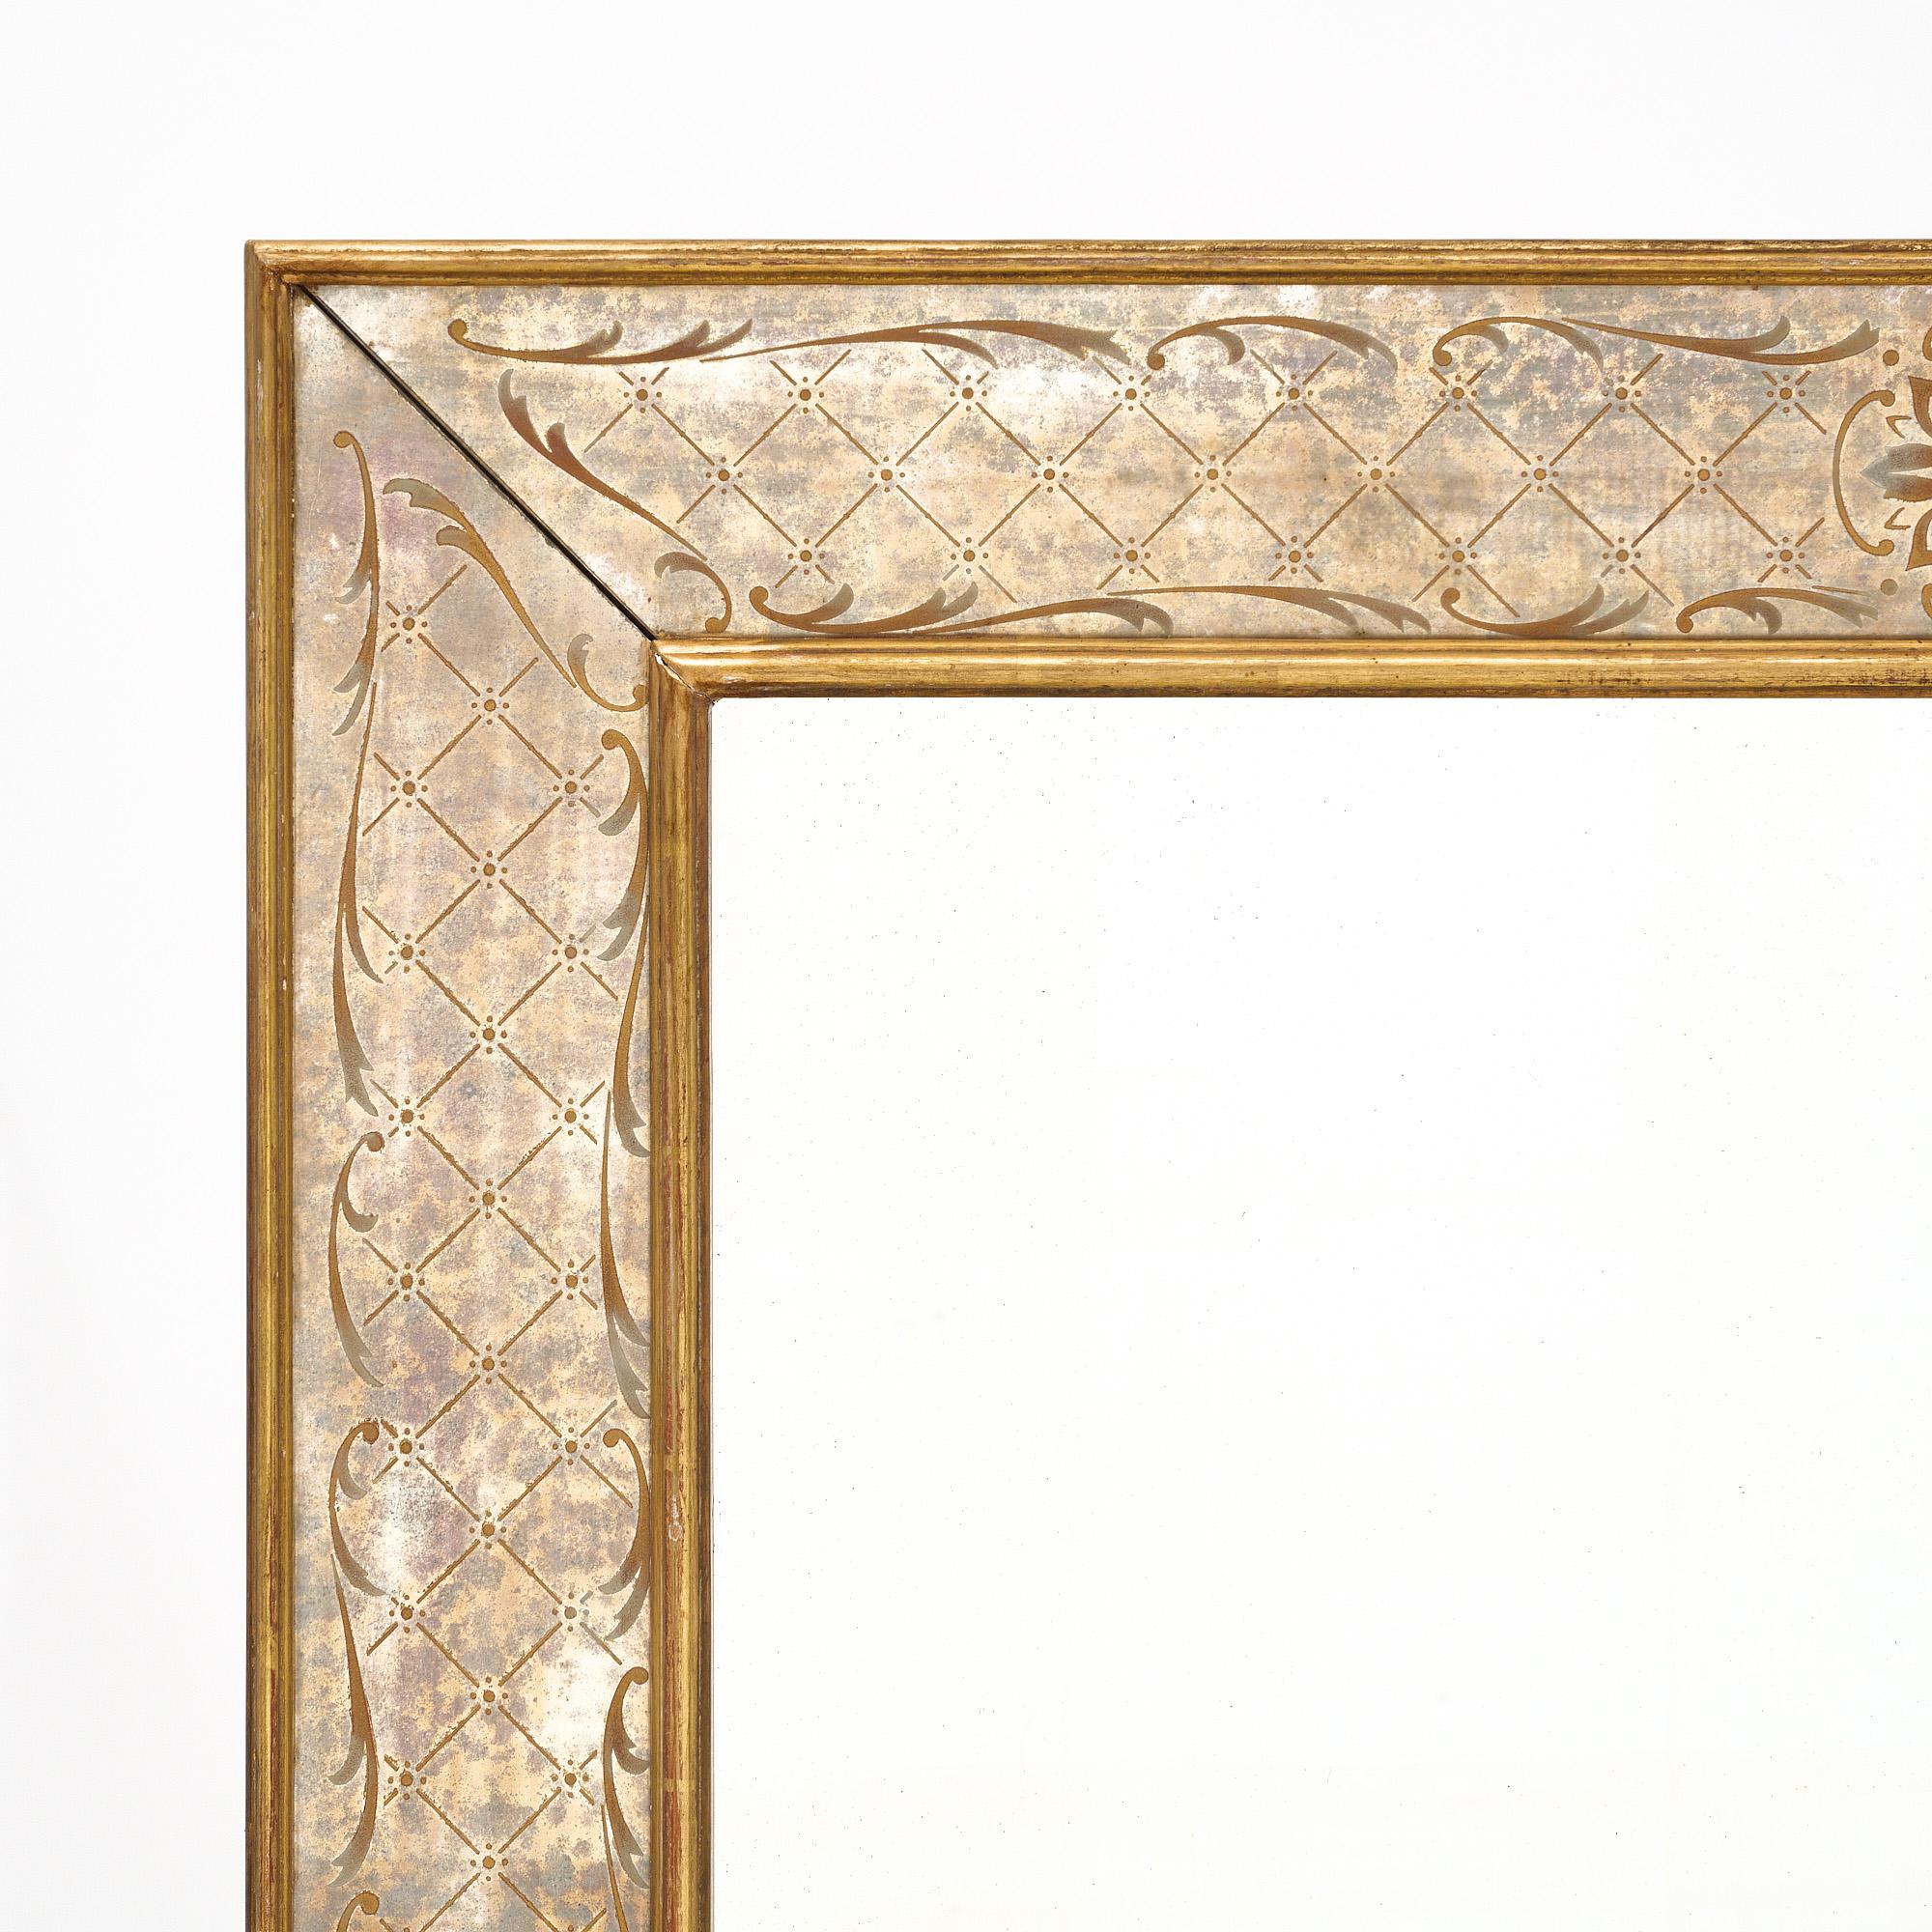 Mirror, French, made with an eglomised (gold leafed and painted on the rear side of the mirror) border. It has a 24 carat gold leafed frame and the original central mirror.
